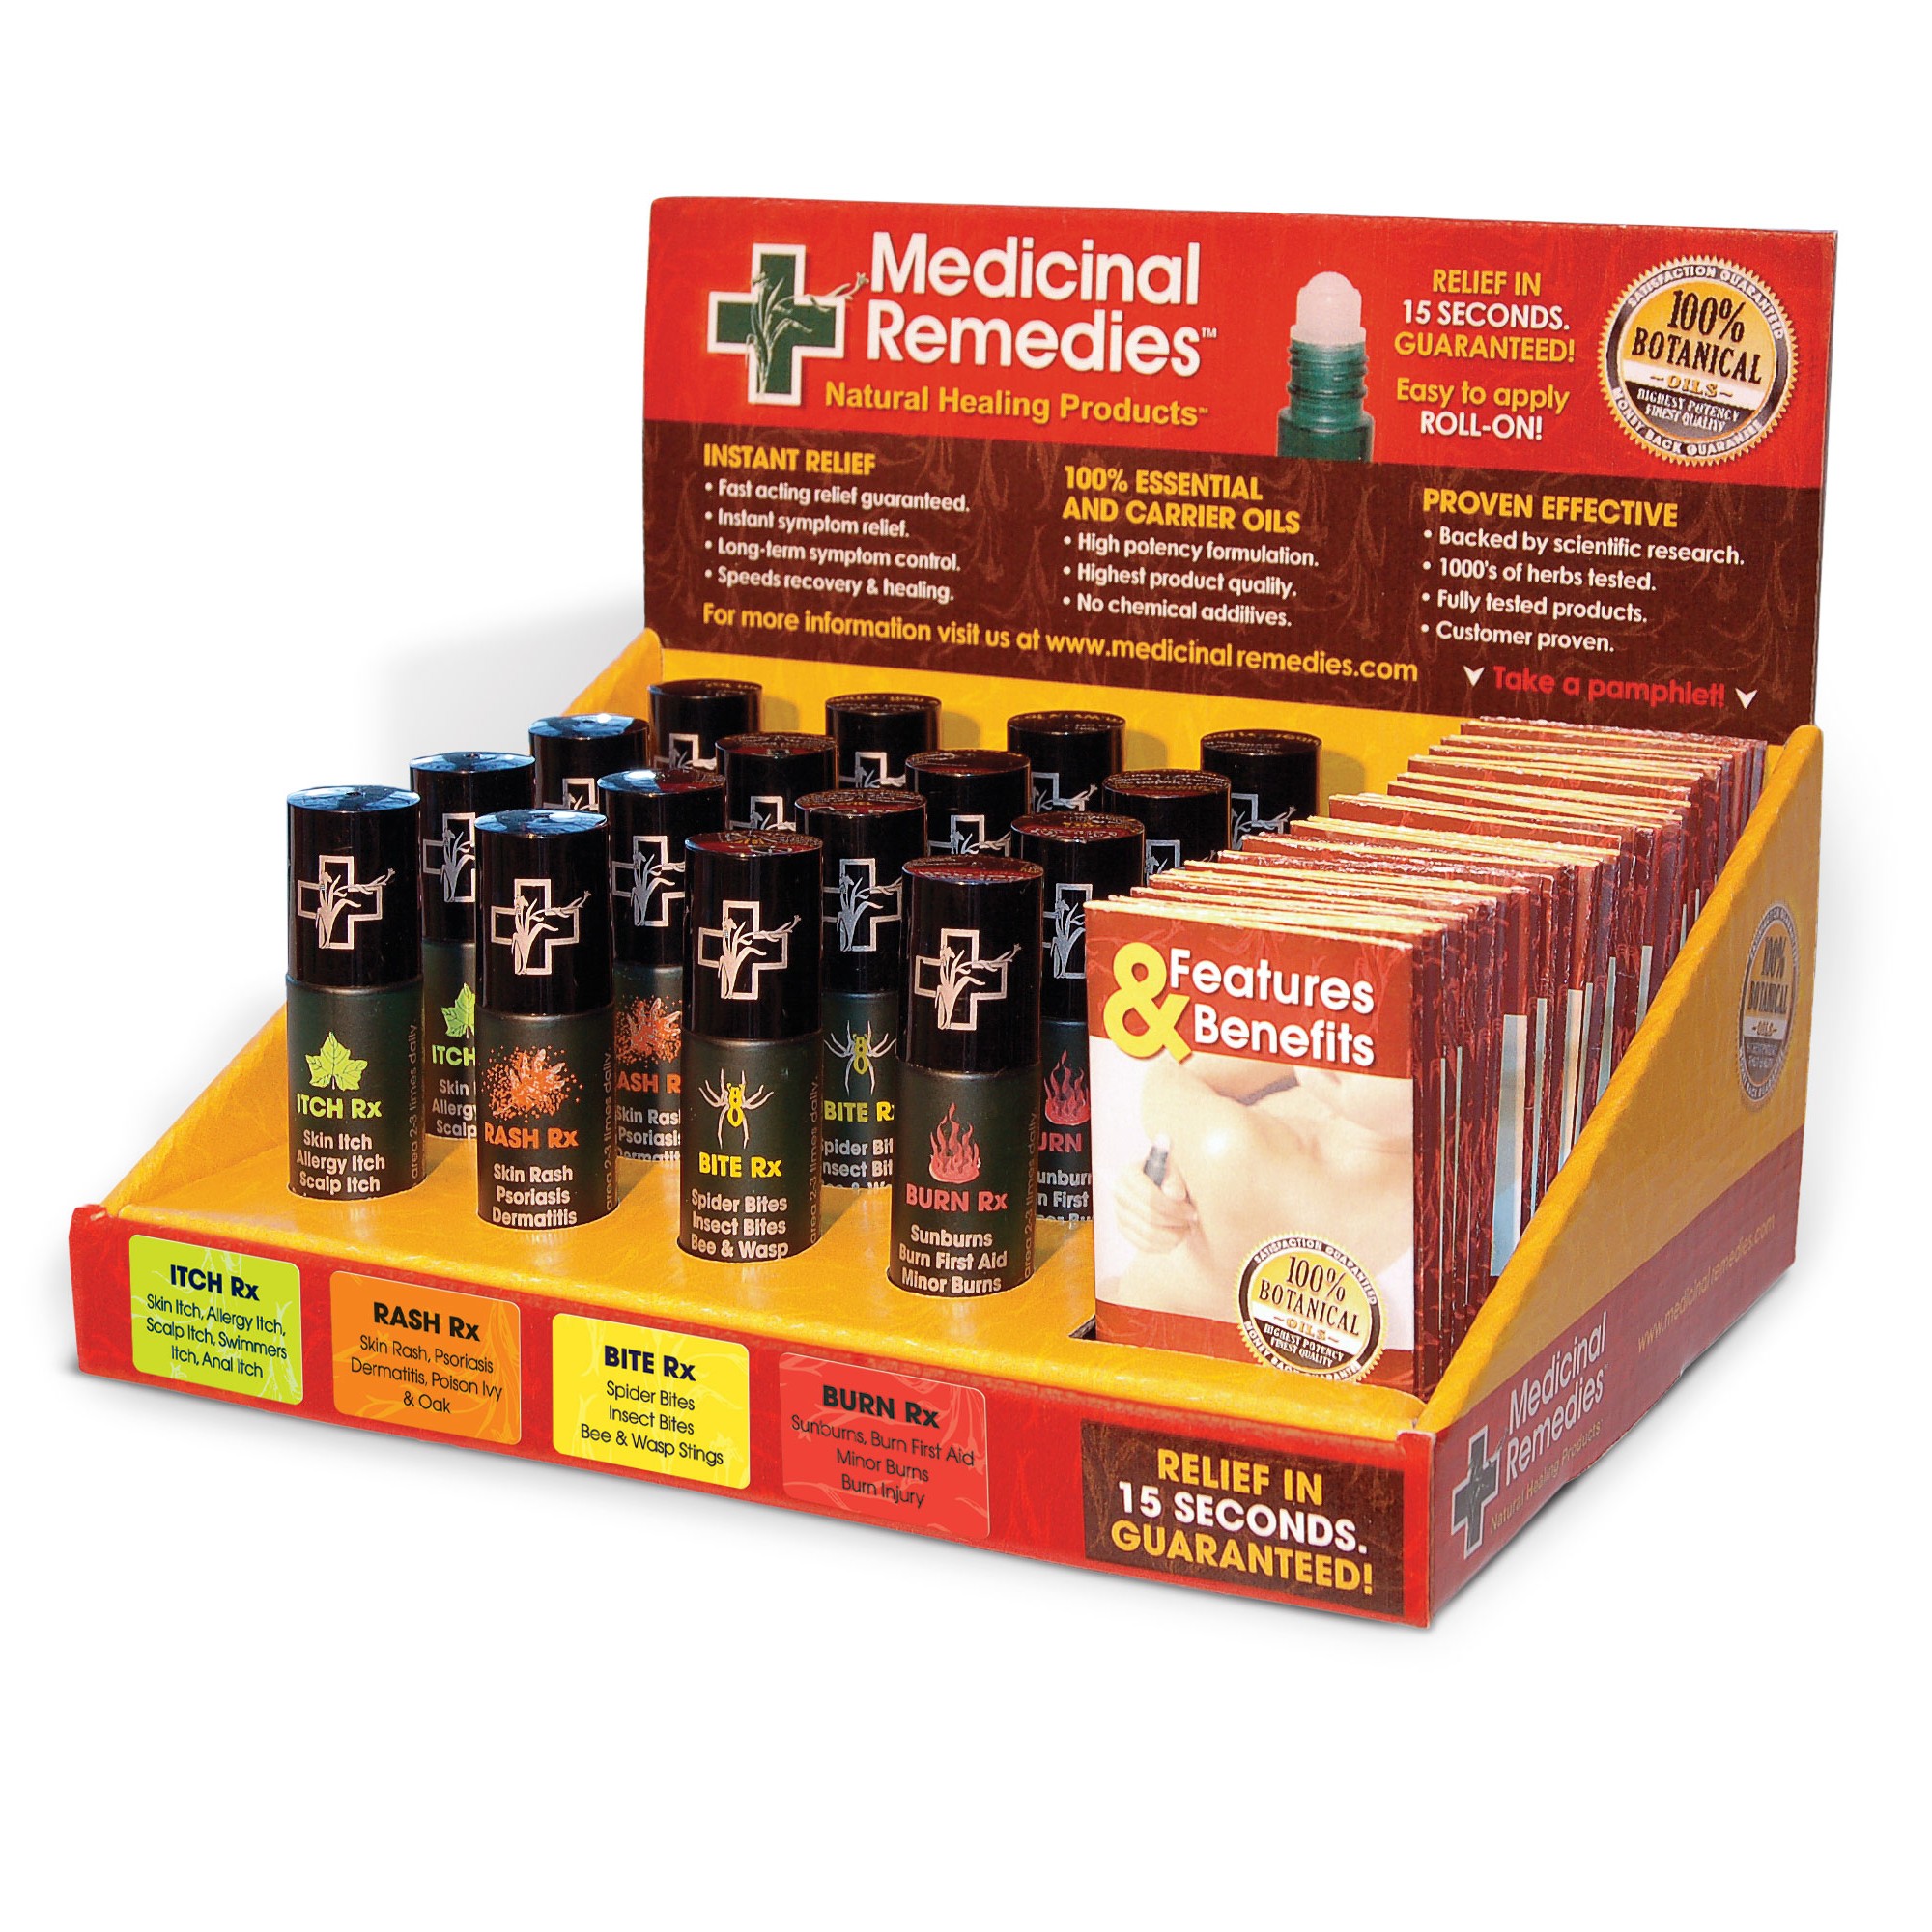 Medicinal Remedies POP Display Shipper and Product Labeling